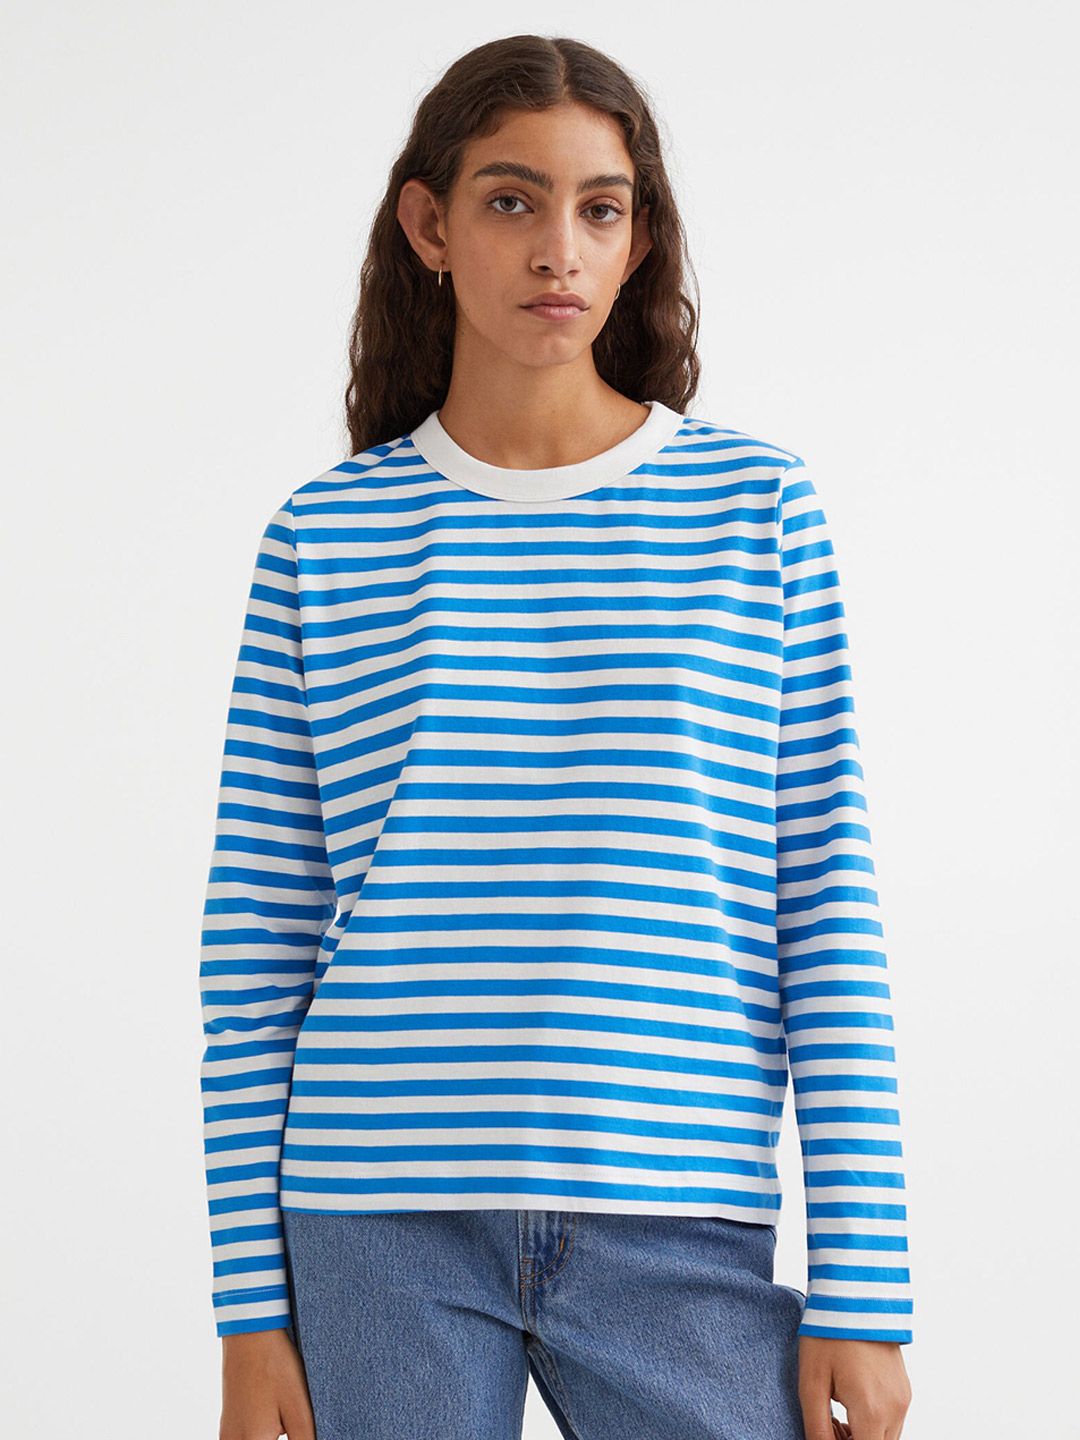 H&M Women Blue Cotton Jersey Top Price in India